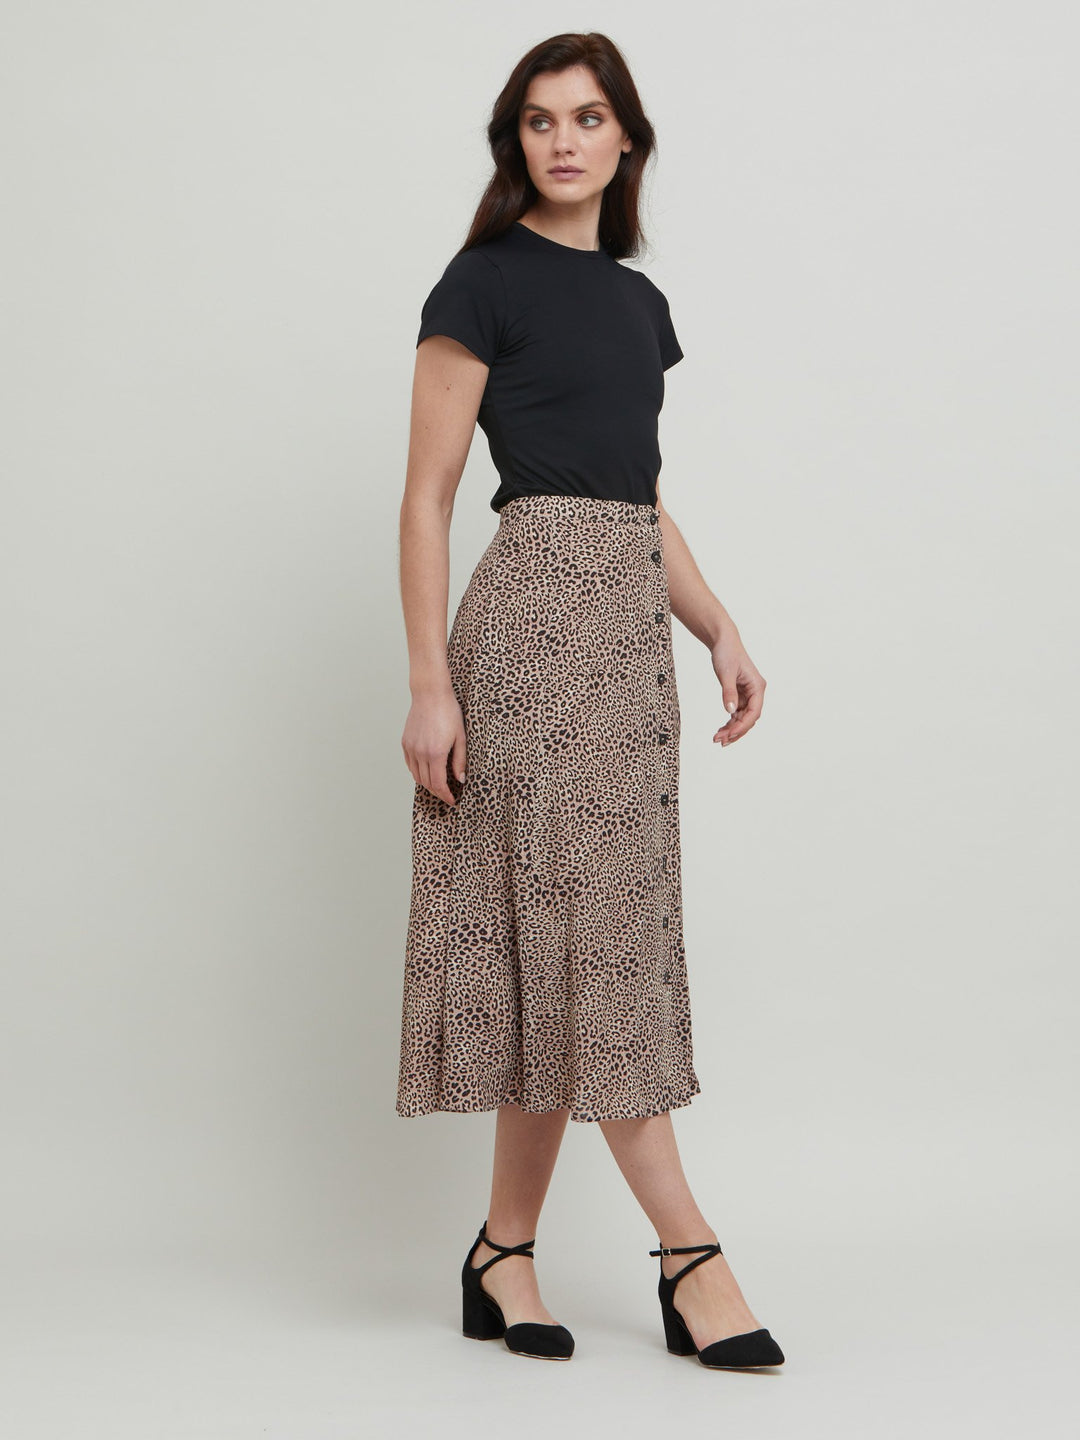 The essential transeasonal skirt. Meet Sadie, a classic animal print skirt in viscose crepe. Off centered button through A-line silhouette with an elasticated back waist band. Relaxed elegance for everyday life. Style with our black timeless tops or dress it down with the Khloe oatmeal sweatshirt.